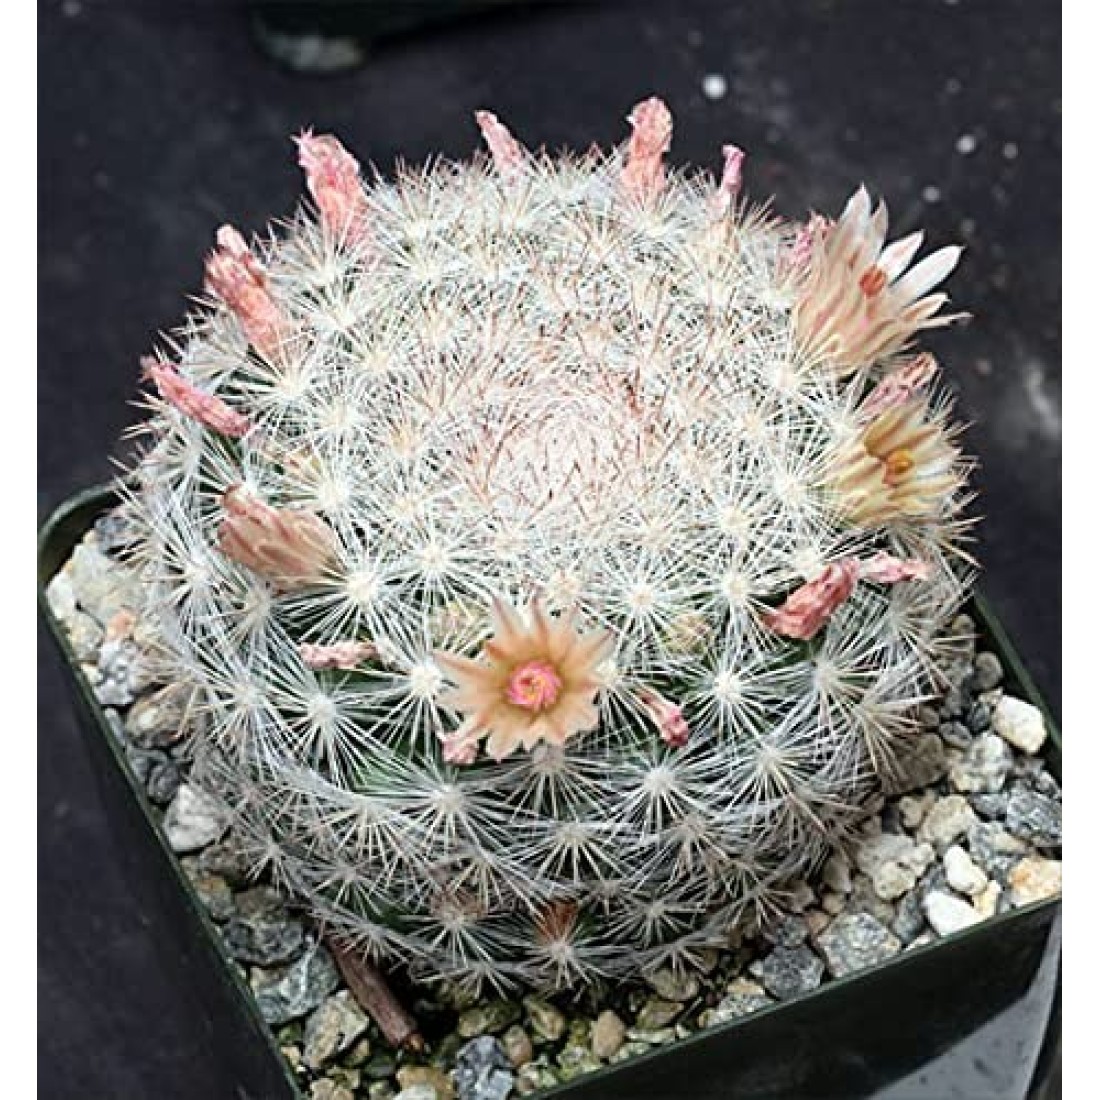 Mammillaria candida (SNOWBALL) cactus live plant ( size 3 inches) flowering size 1